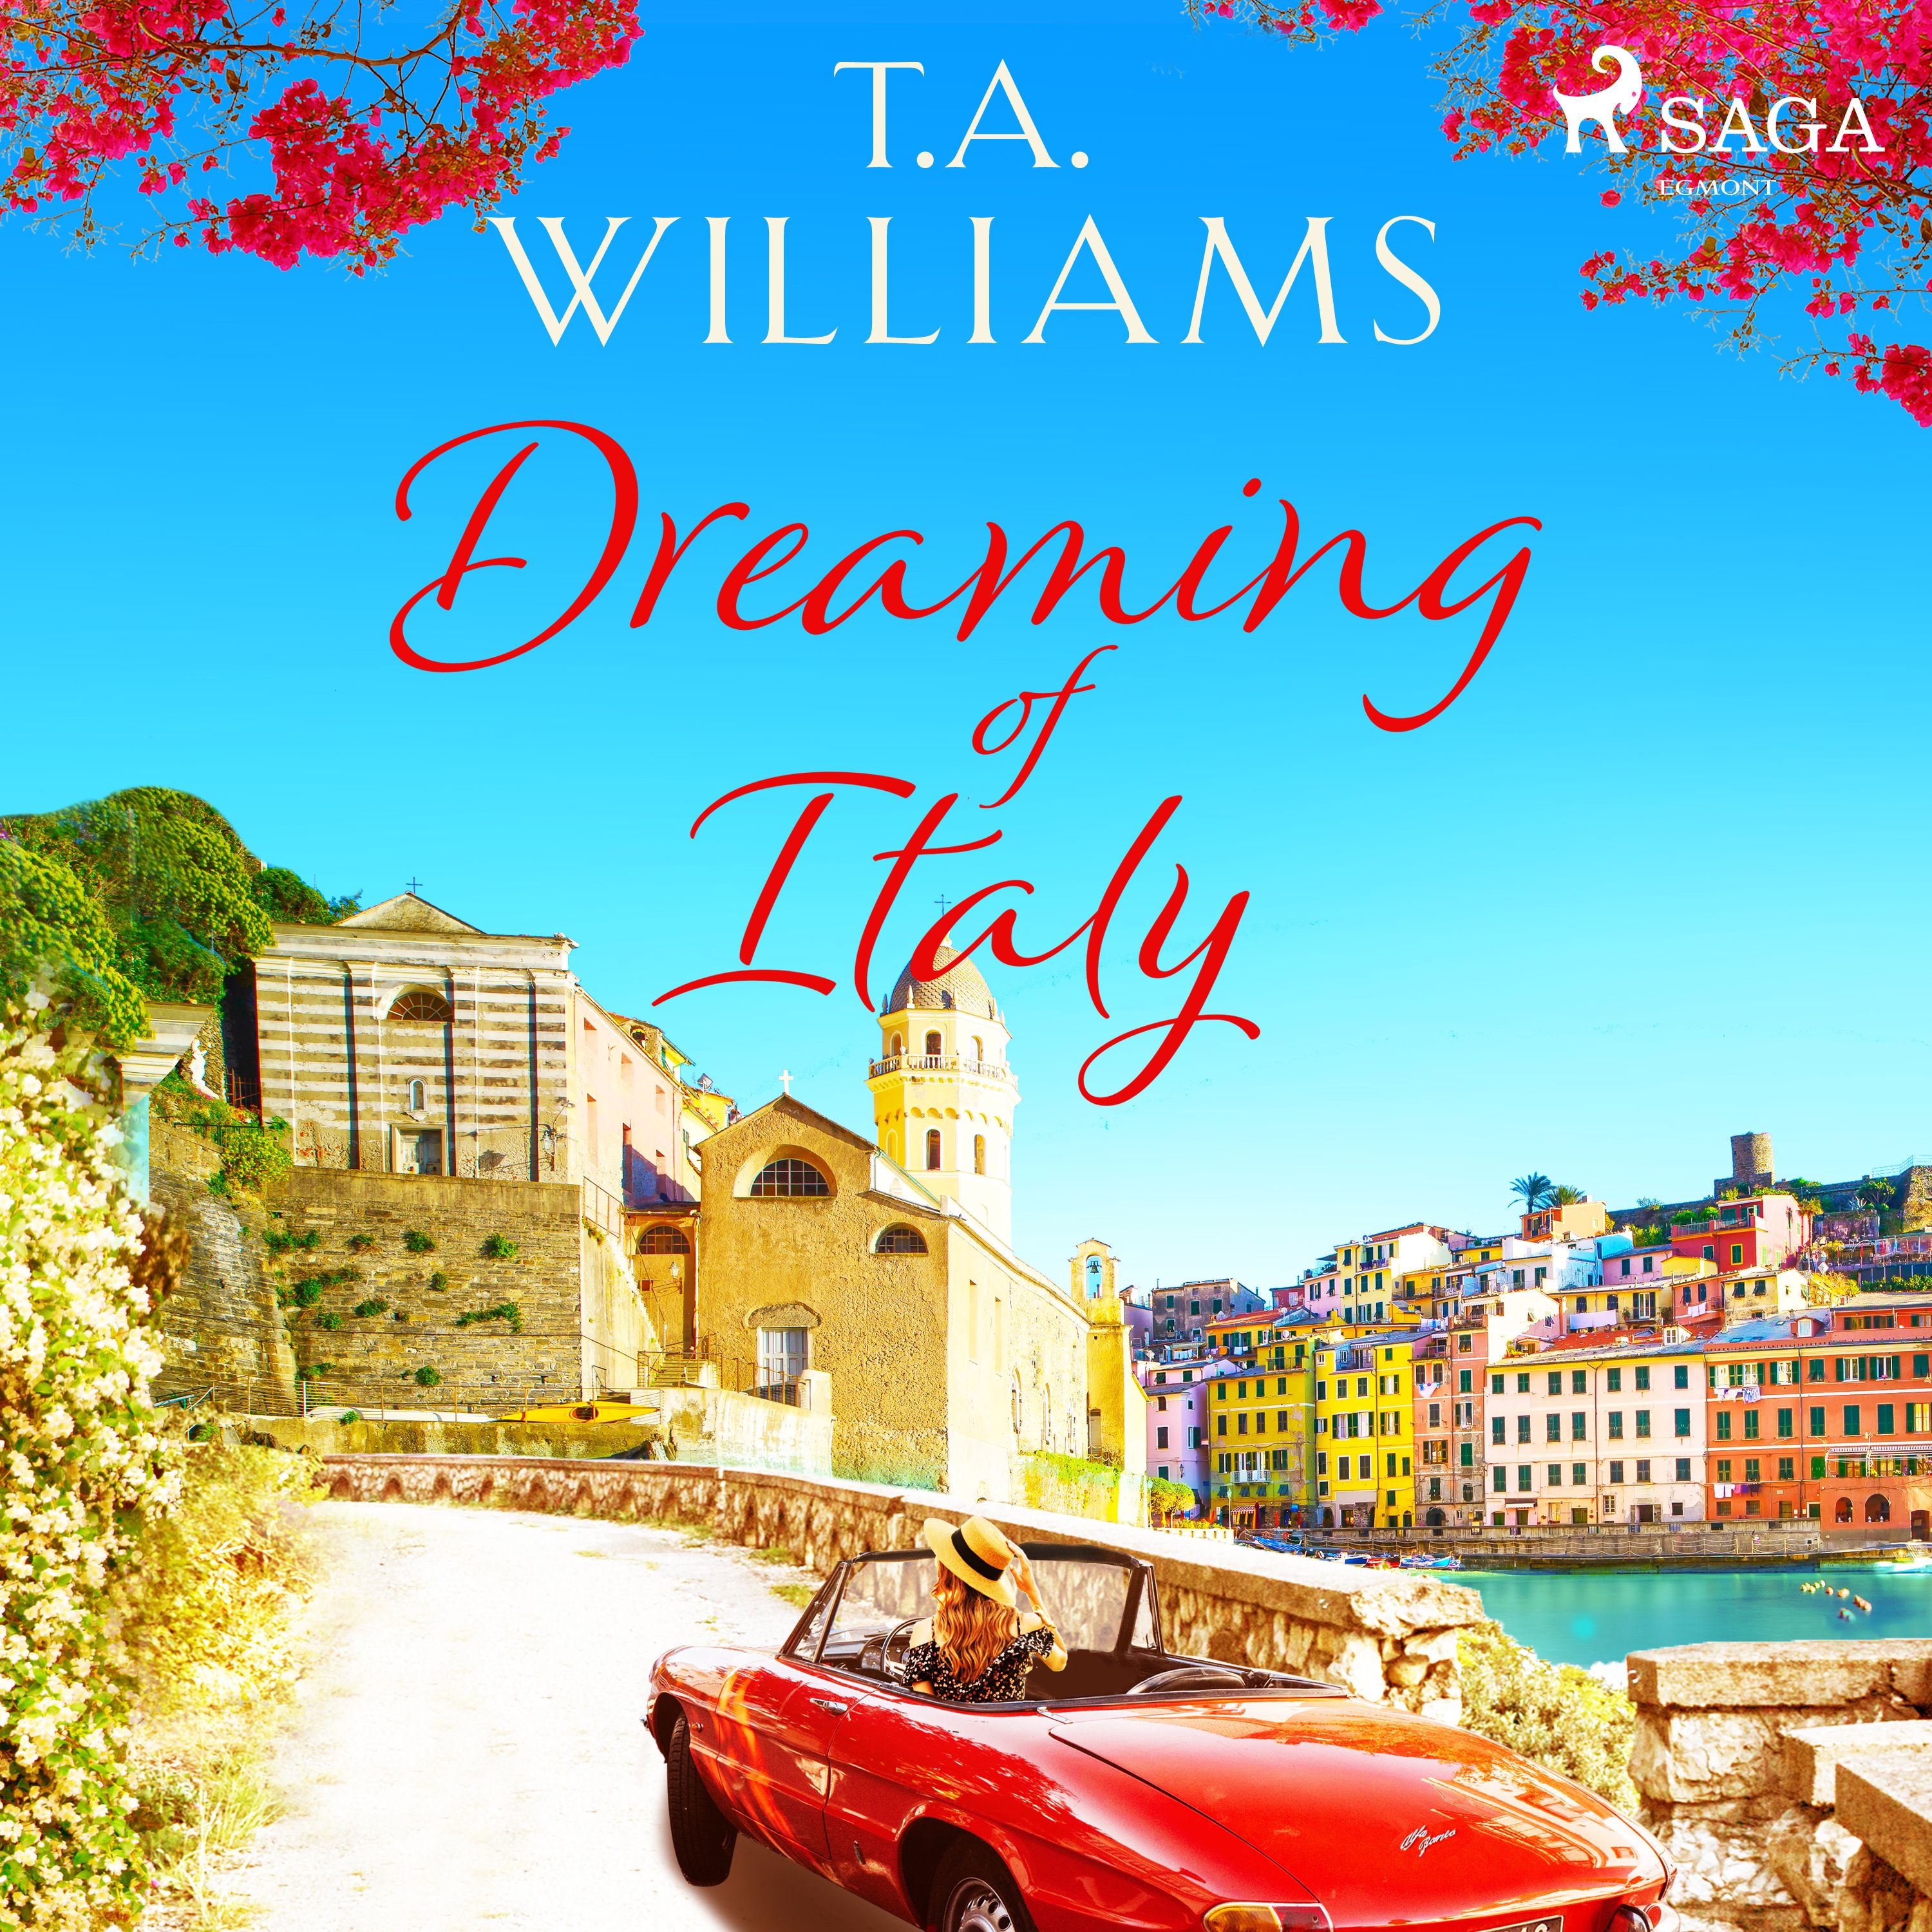 Dreaming of Italy, audiobook by T.A. Williams